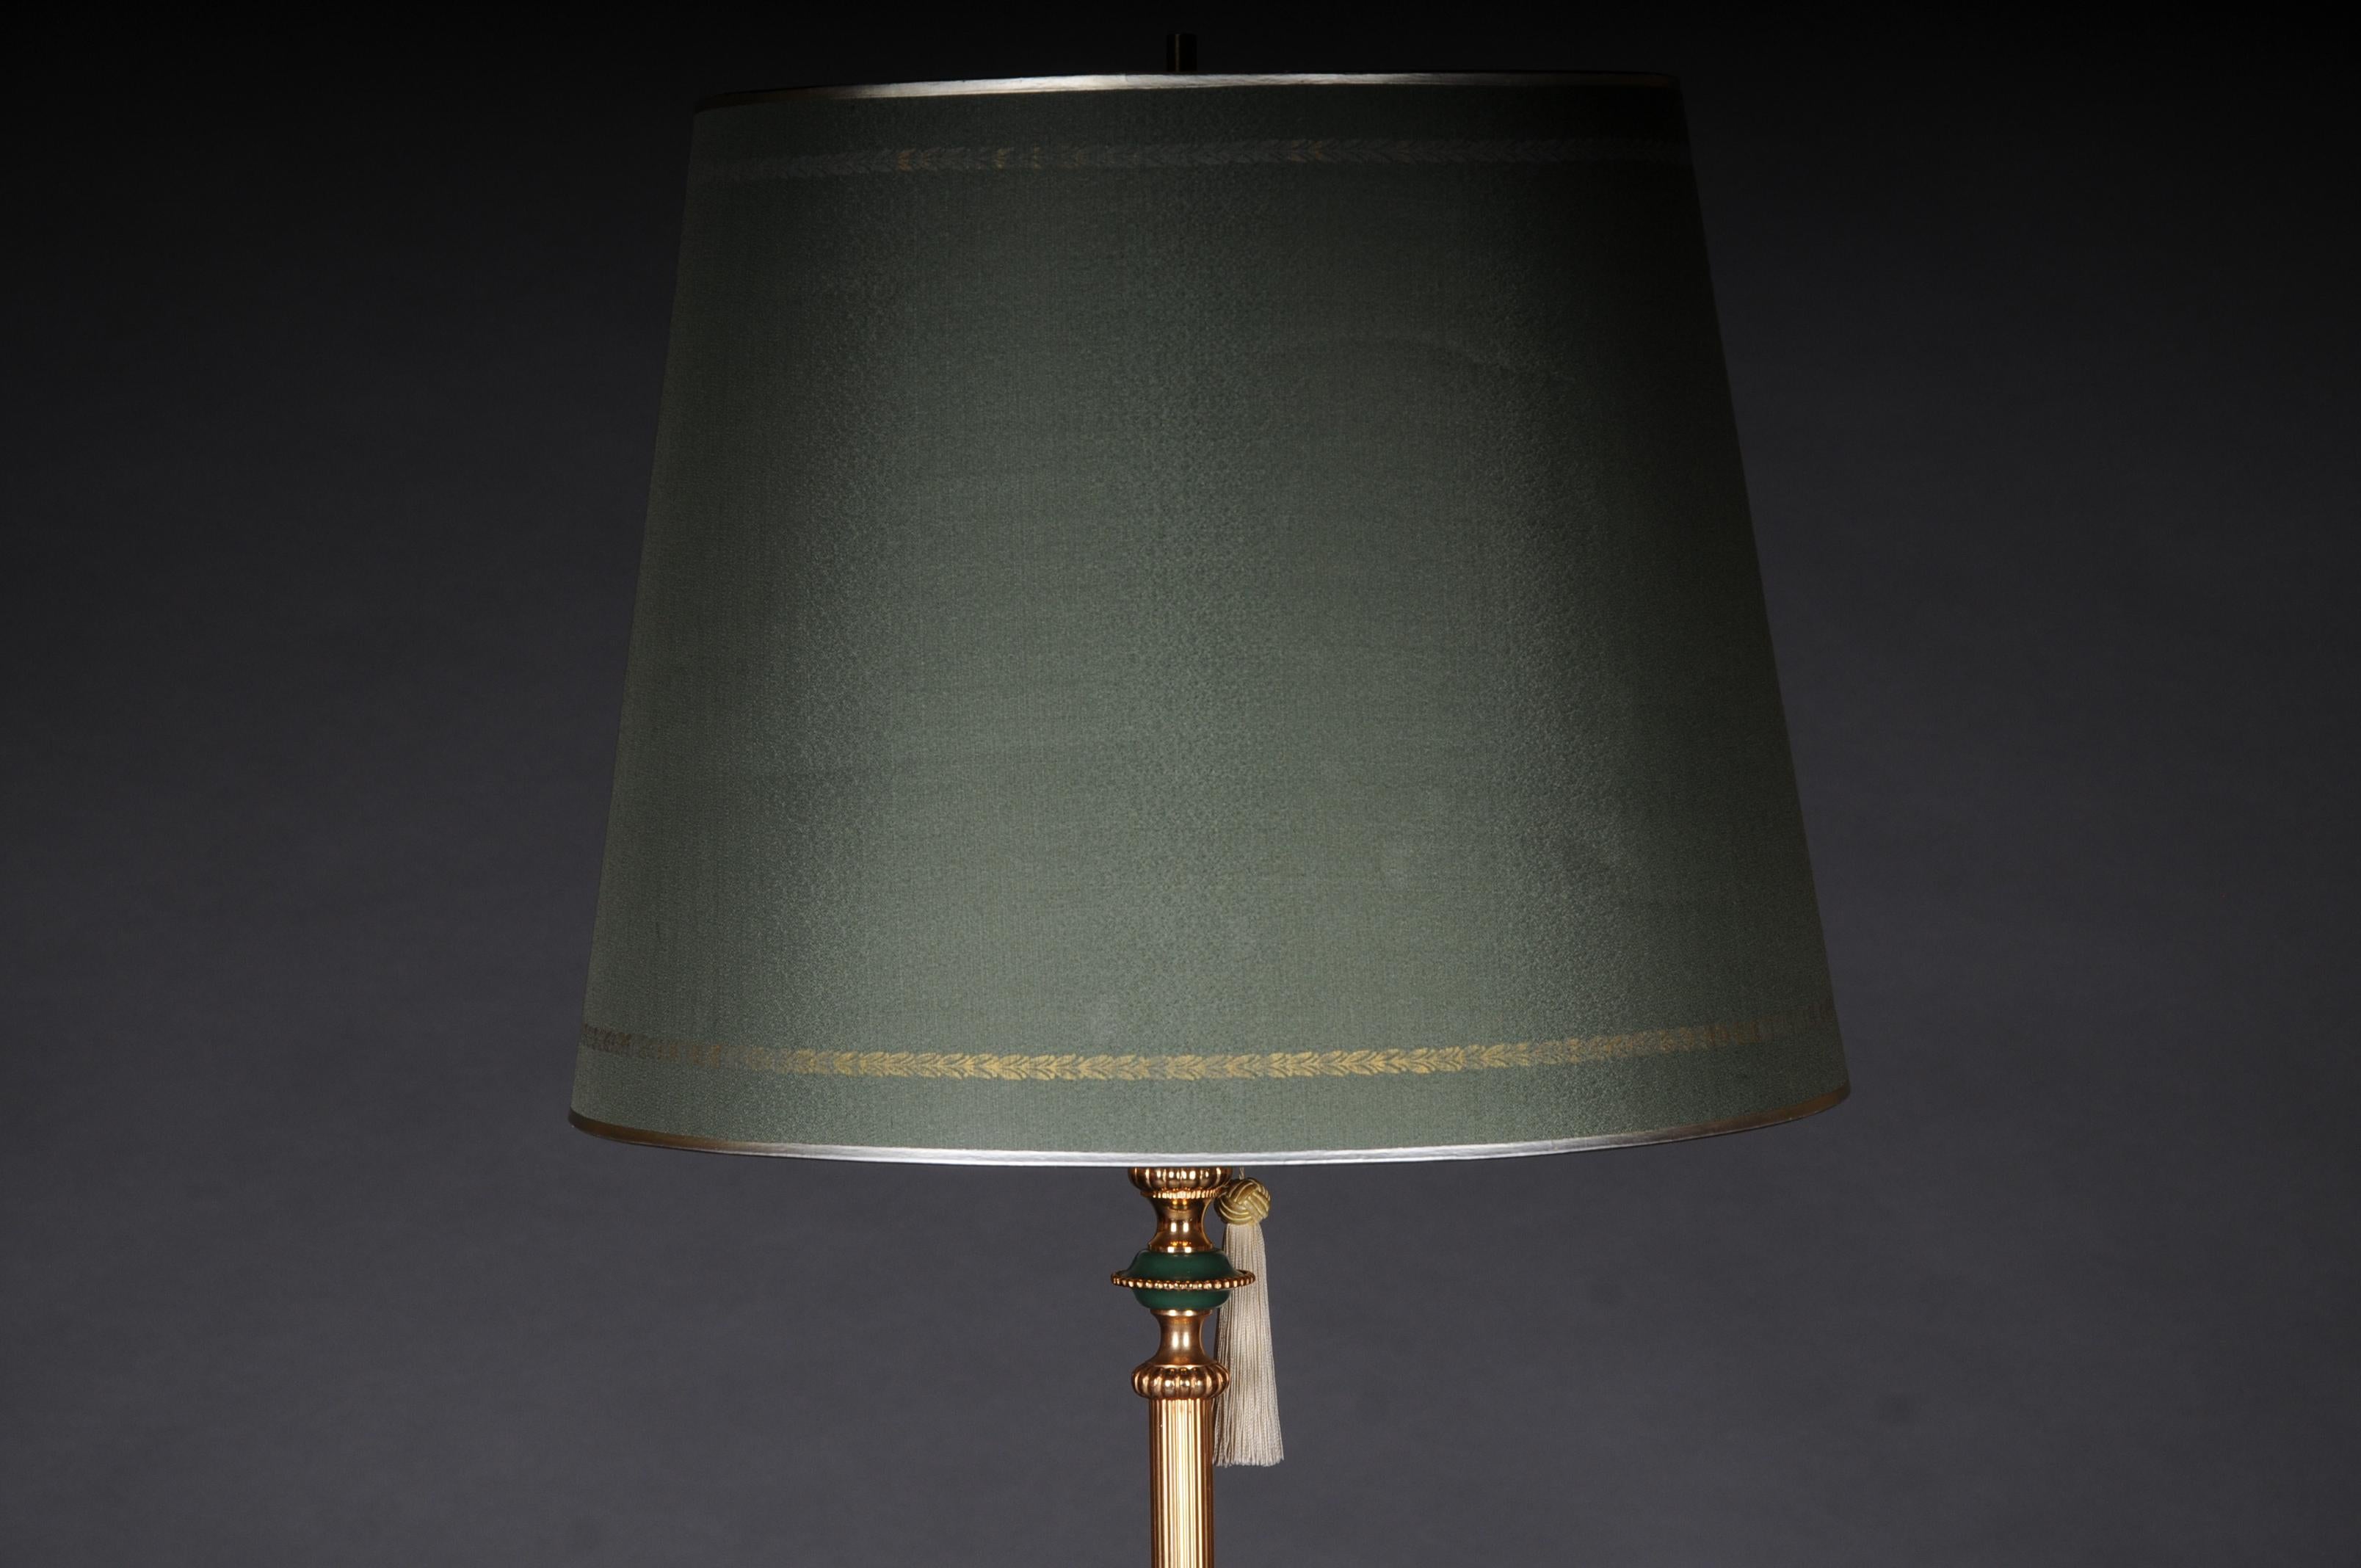 Beautiful french floor lamp in Empire style 20th century

Polished brass and green shade. With 2 light bulb socket, electrified. France, Empire style, 20th century

(F-127).